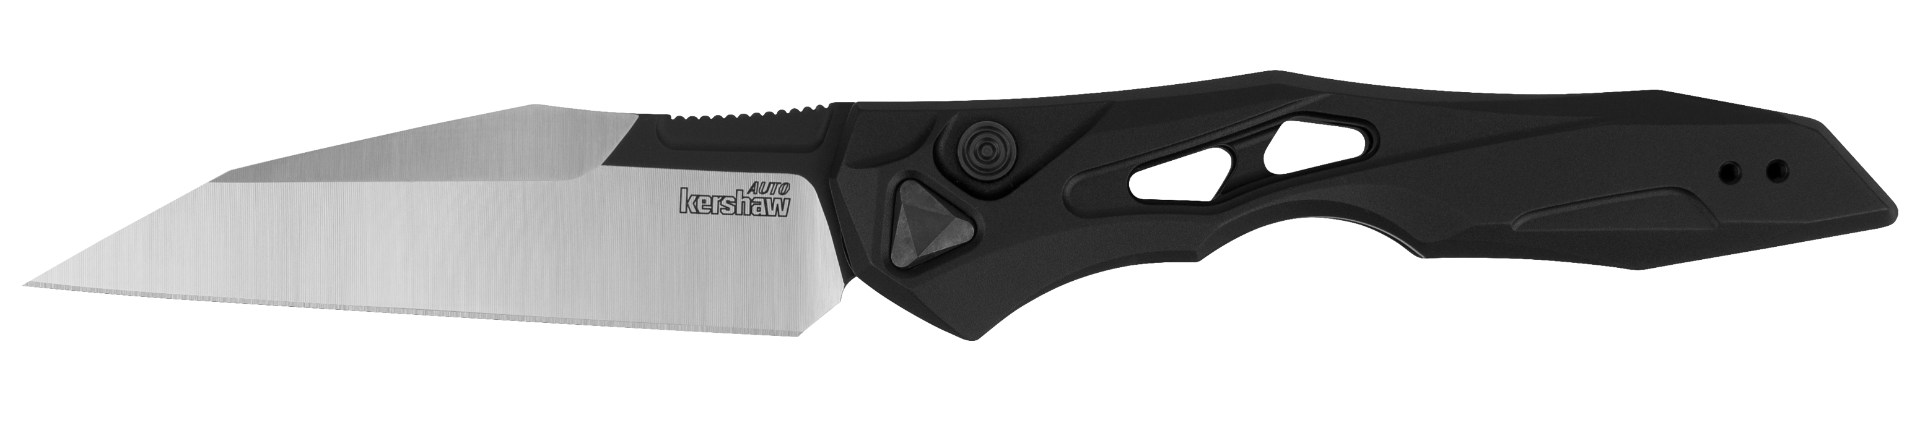 Kershaw Launch 13 - Automatic - Black Aluminum - Wharncliffe Blade - 7650